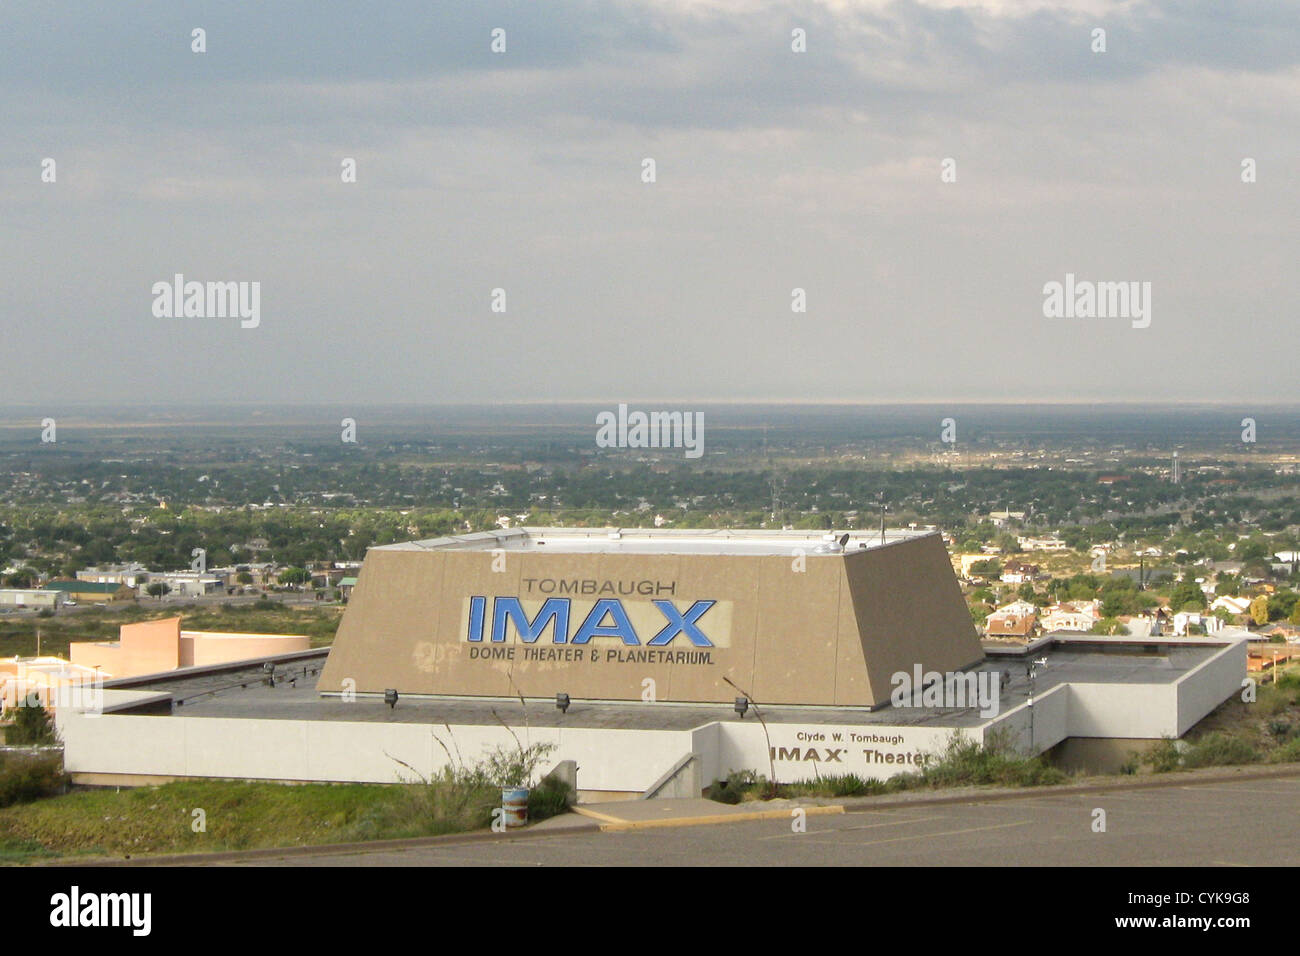 Clyde W. Tombaugh IMAX Theater and Planetarium at the New Mexico Museum of Space History in Alamogordo, New Mexico. Stock Photo